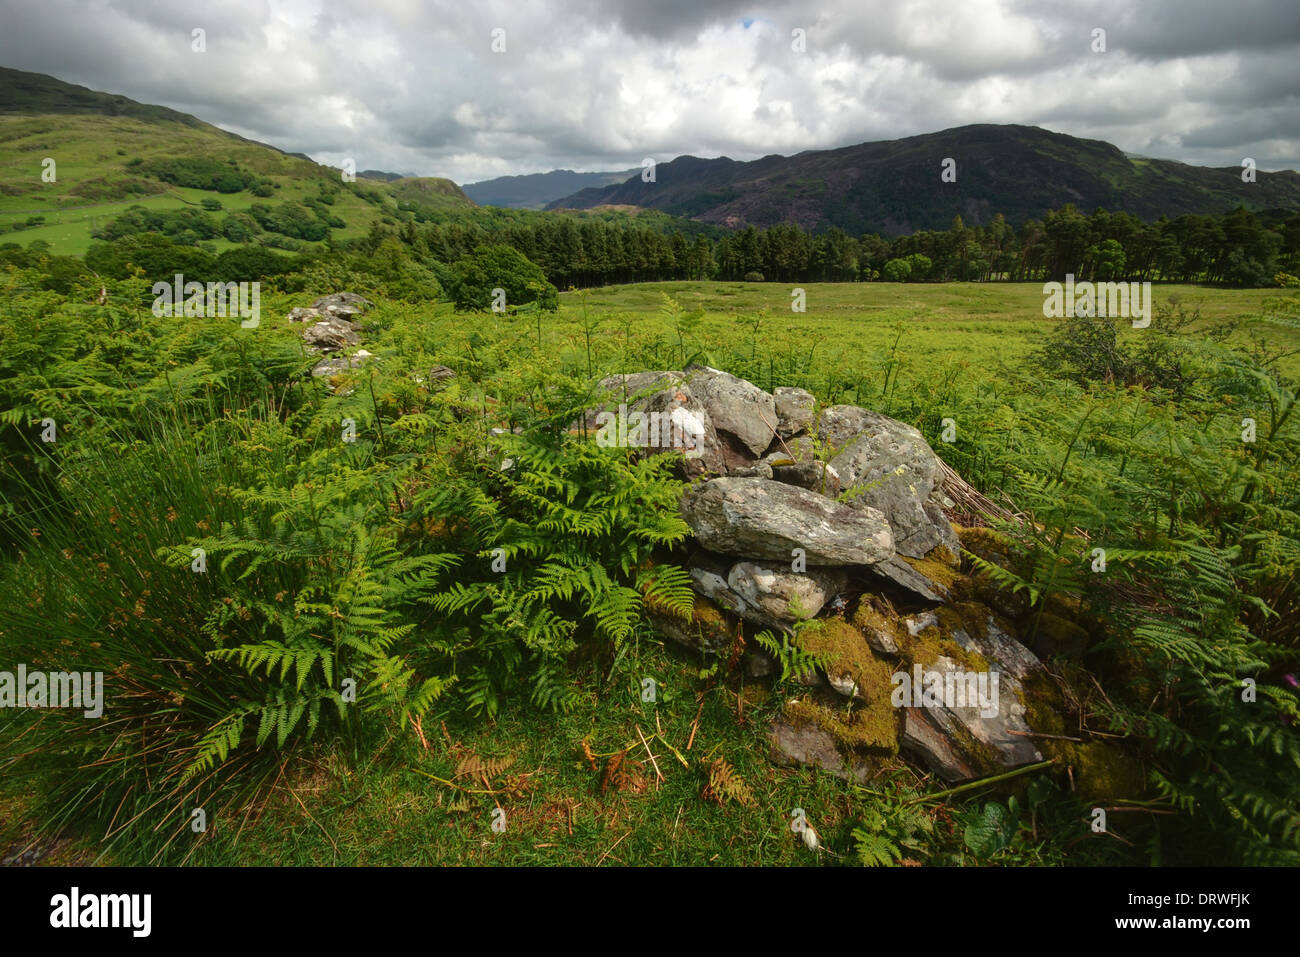 Welsh landscape in the Snowdonia National Park Stock Photo